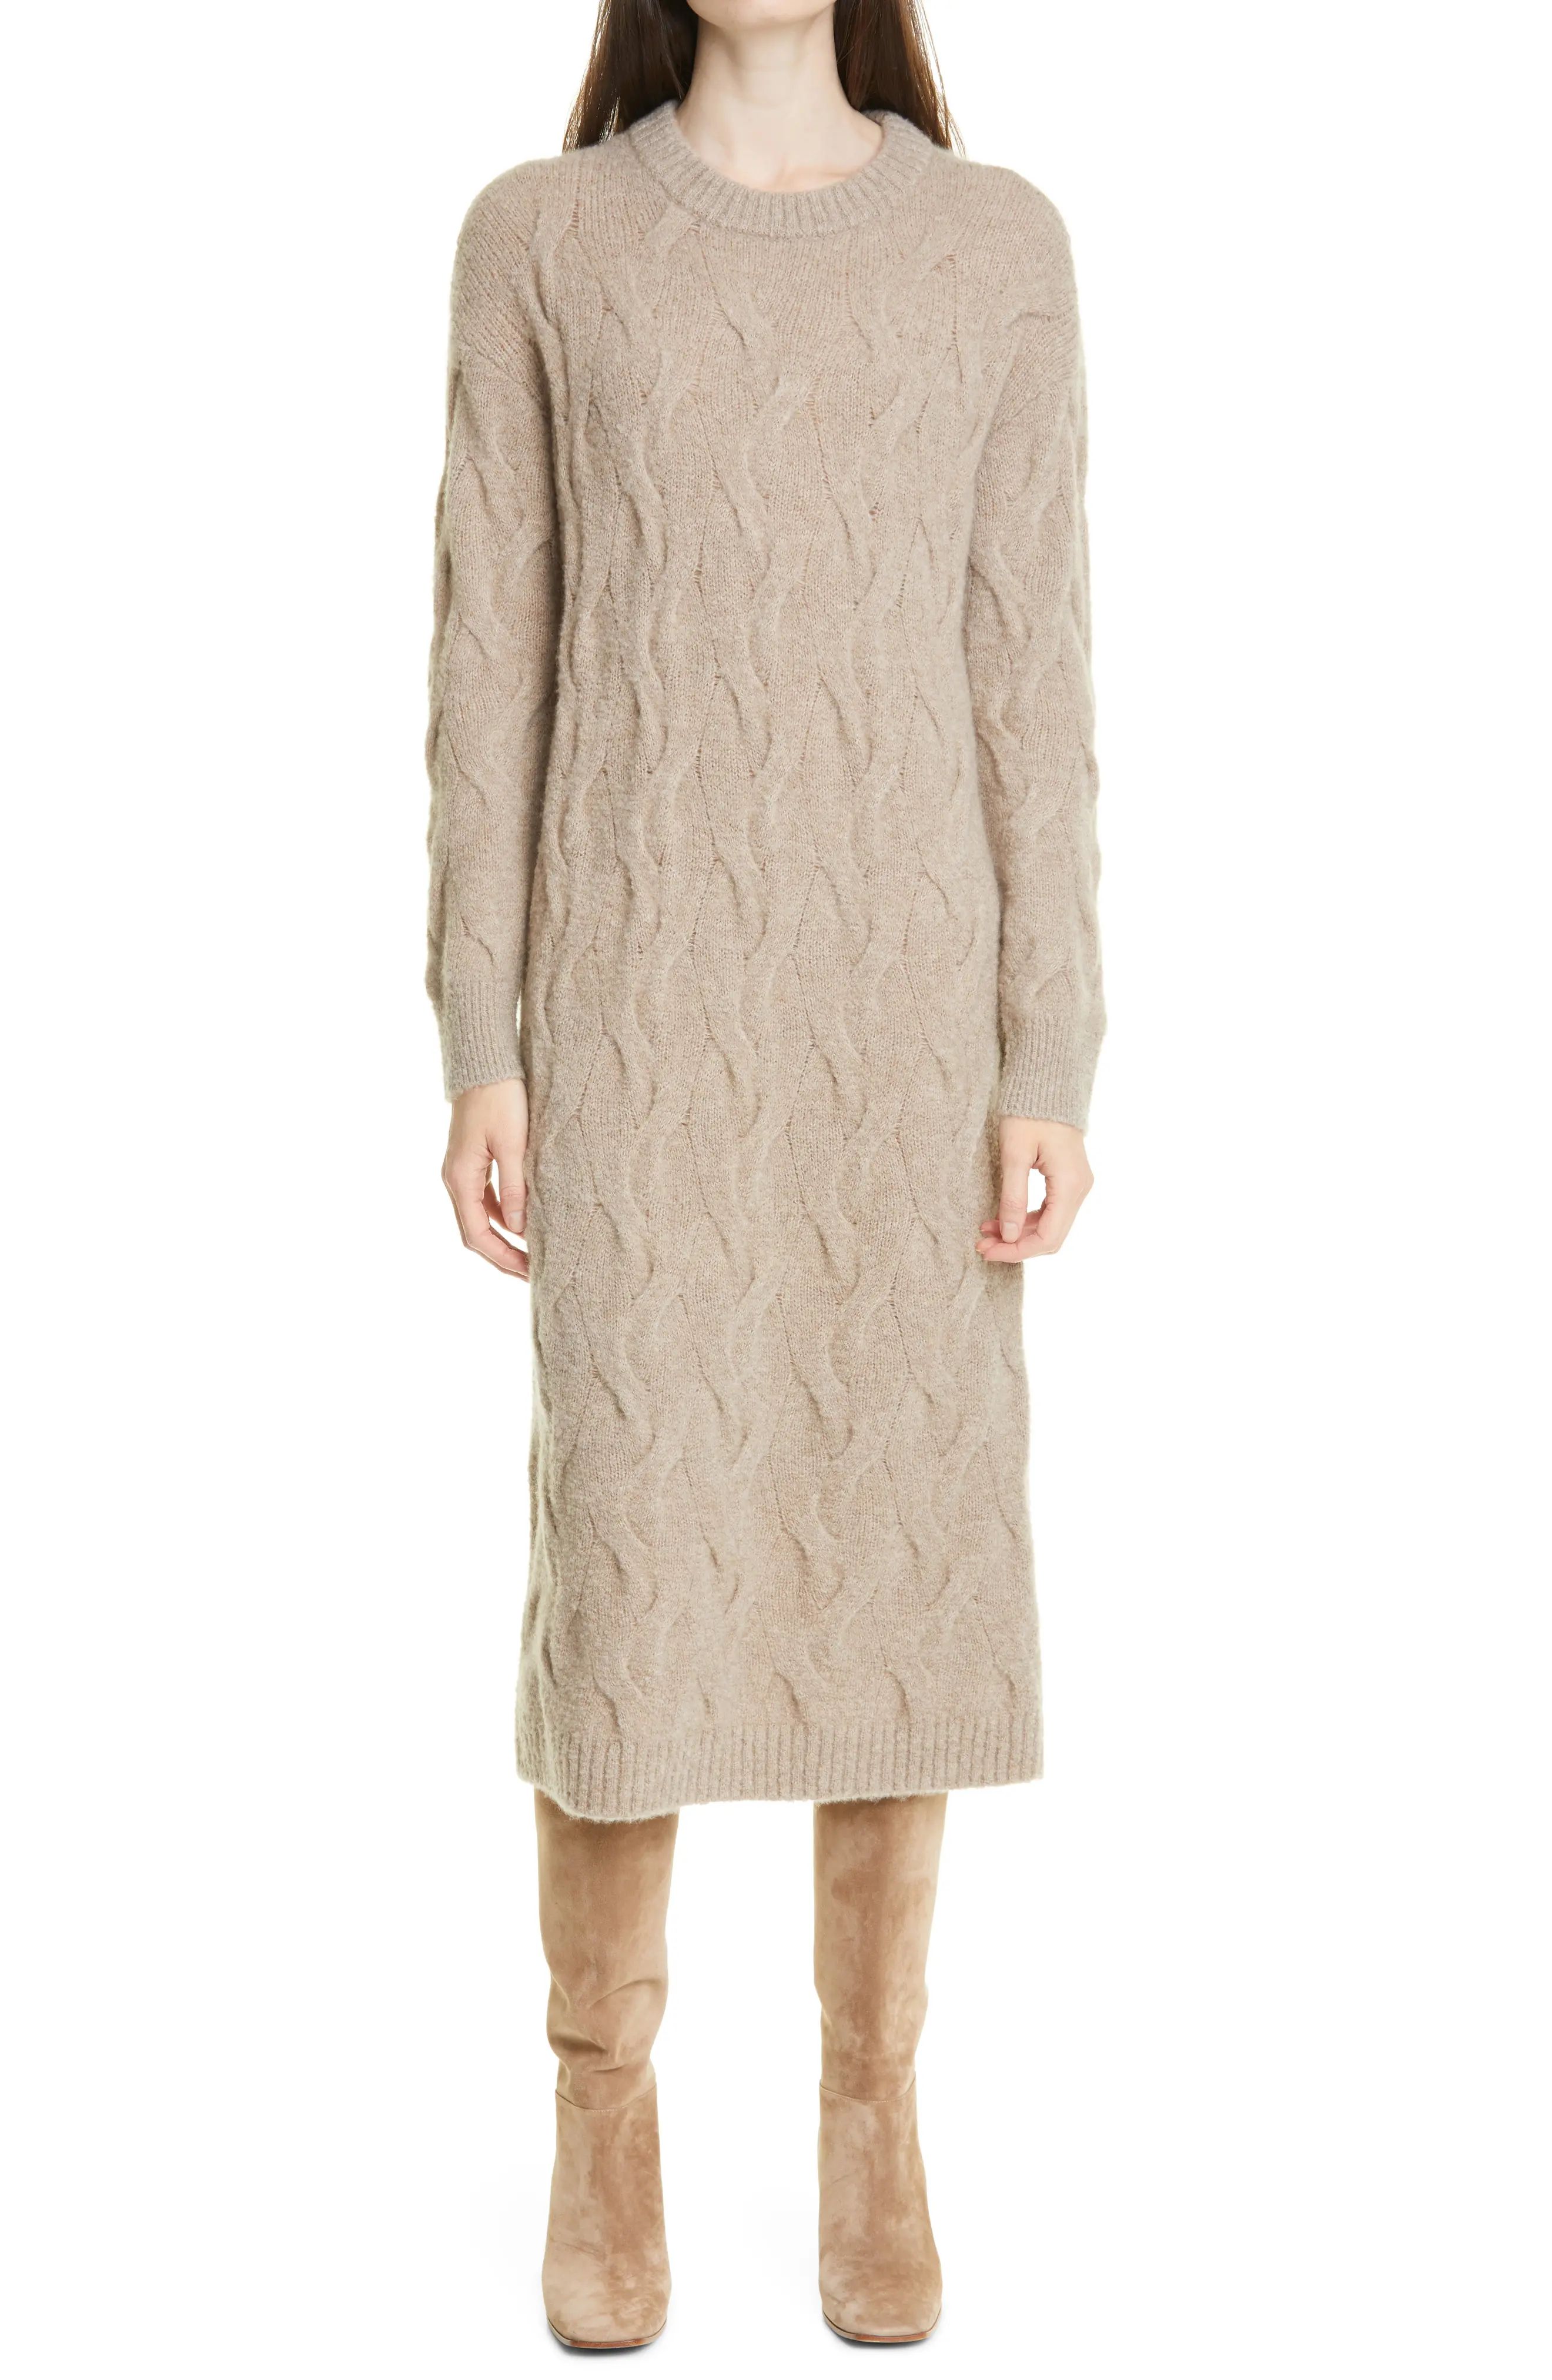 Nordstrom Signature Cable Long Sleeve Cashmere Sweater Dress in Tan Portabella Heather at Nordstrom, | Nordstrom